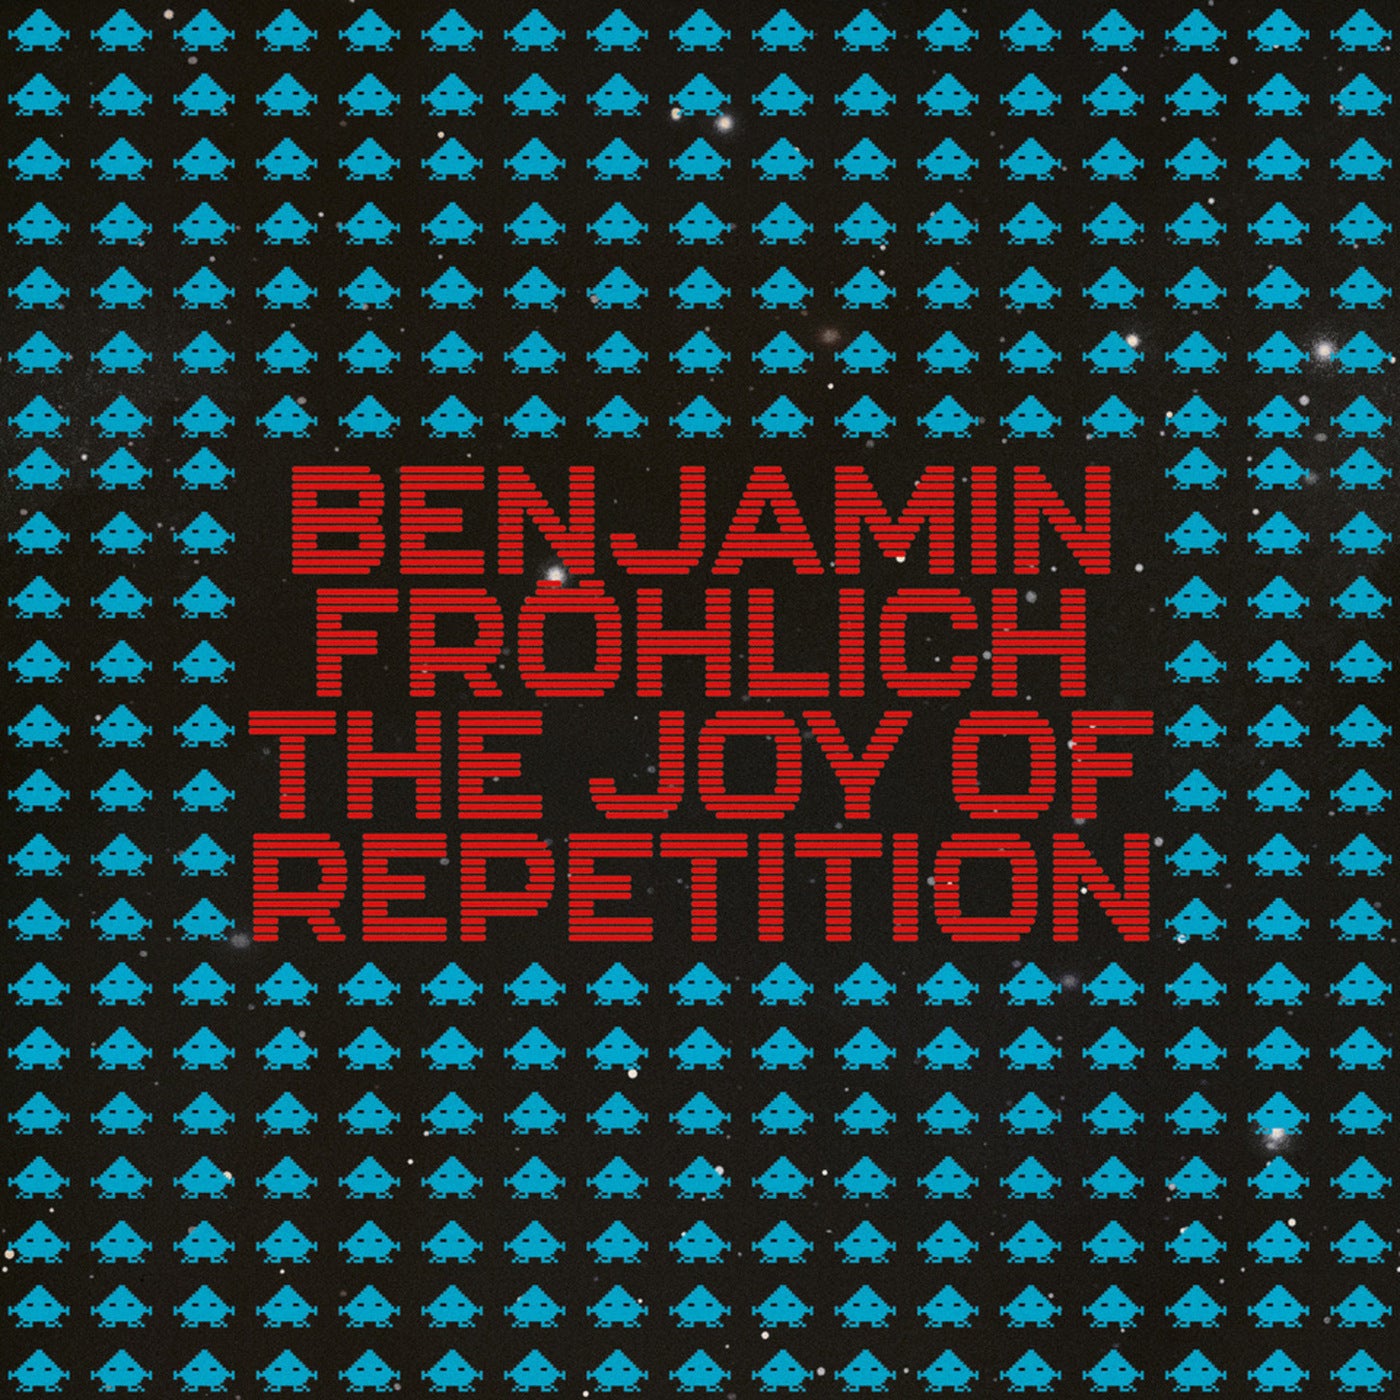 Download The Joy of Repetition on Electrobuzz